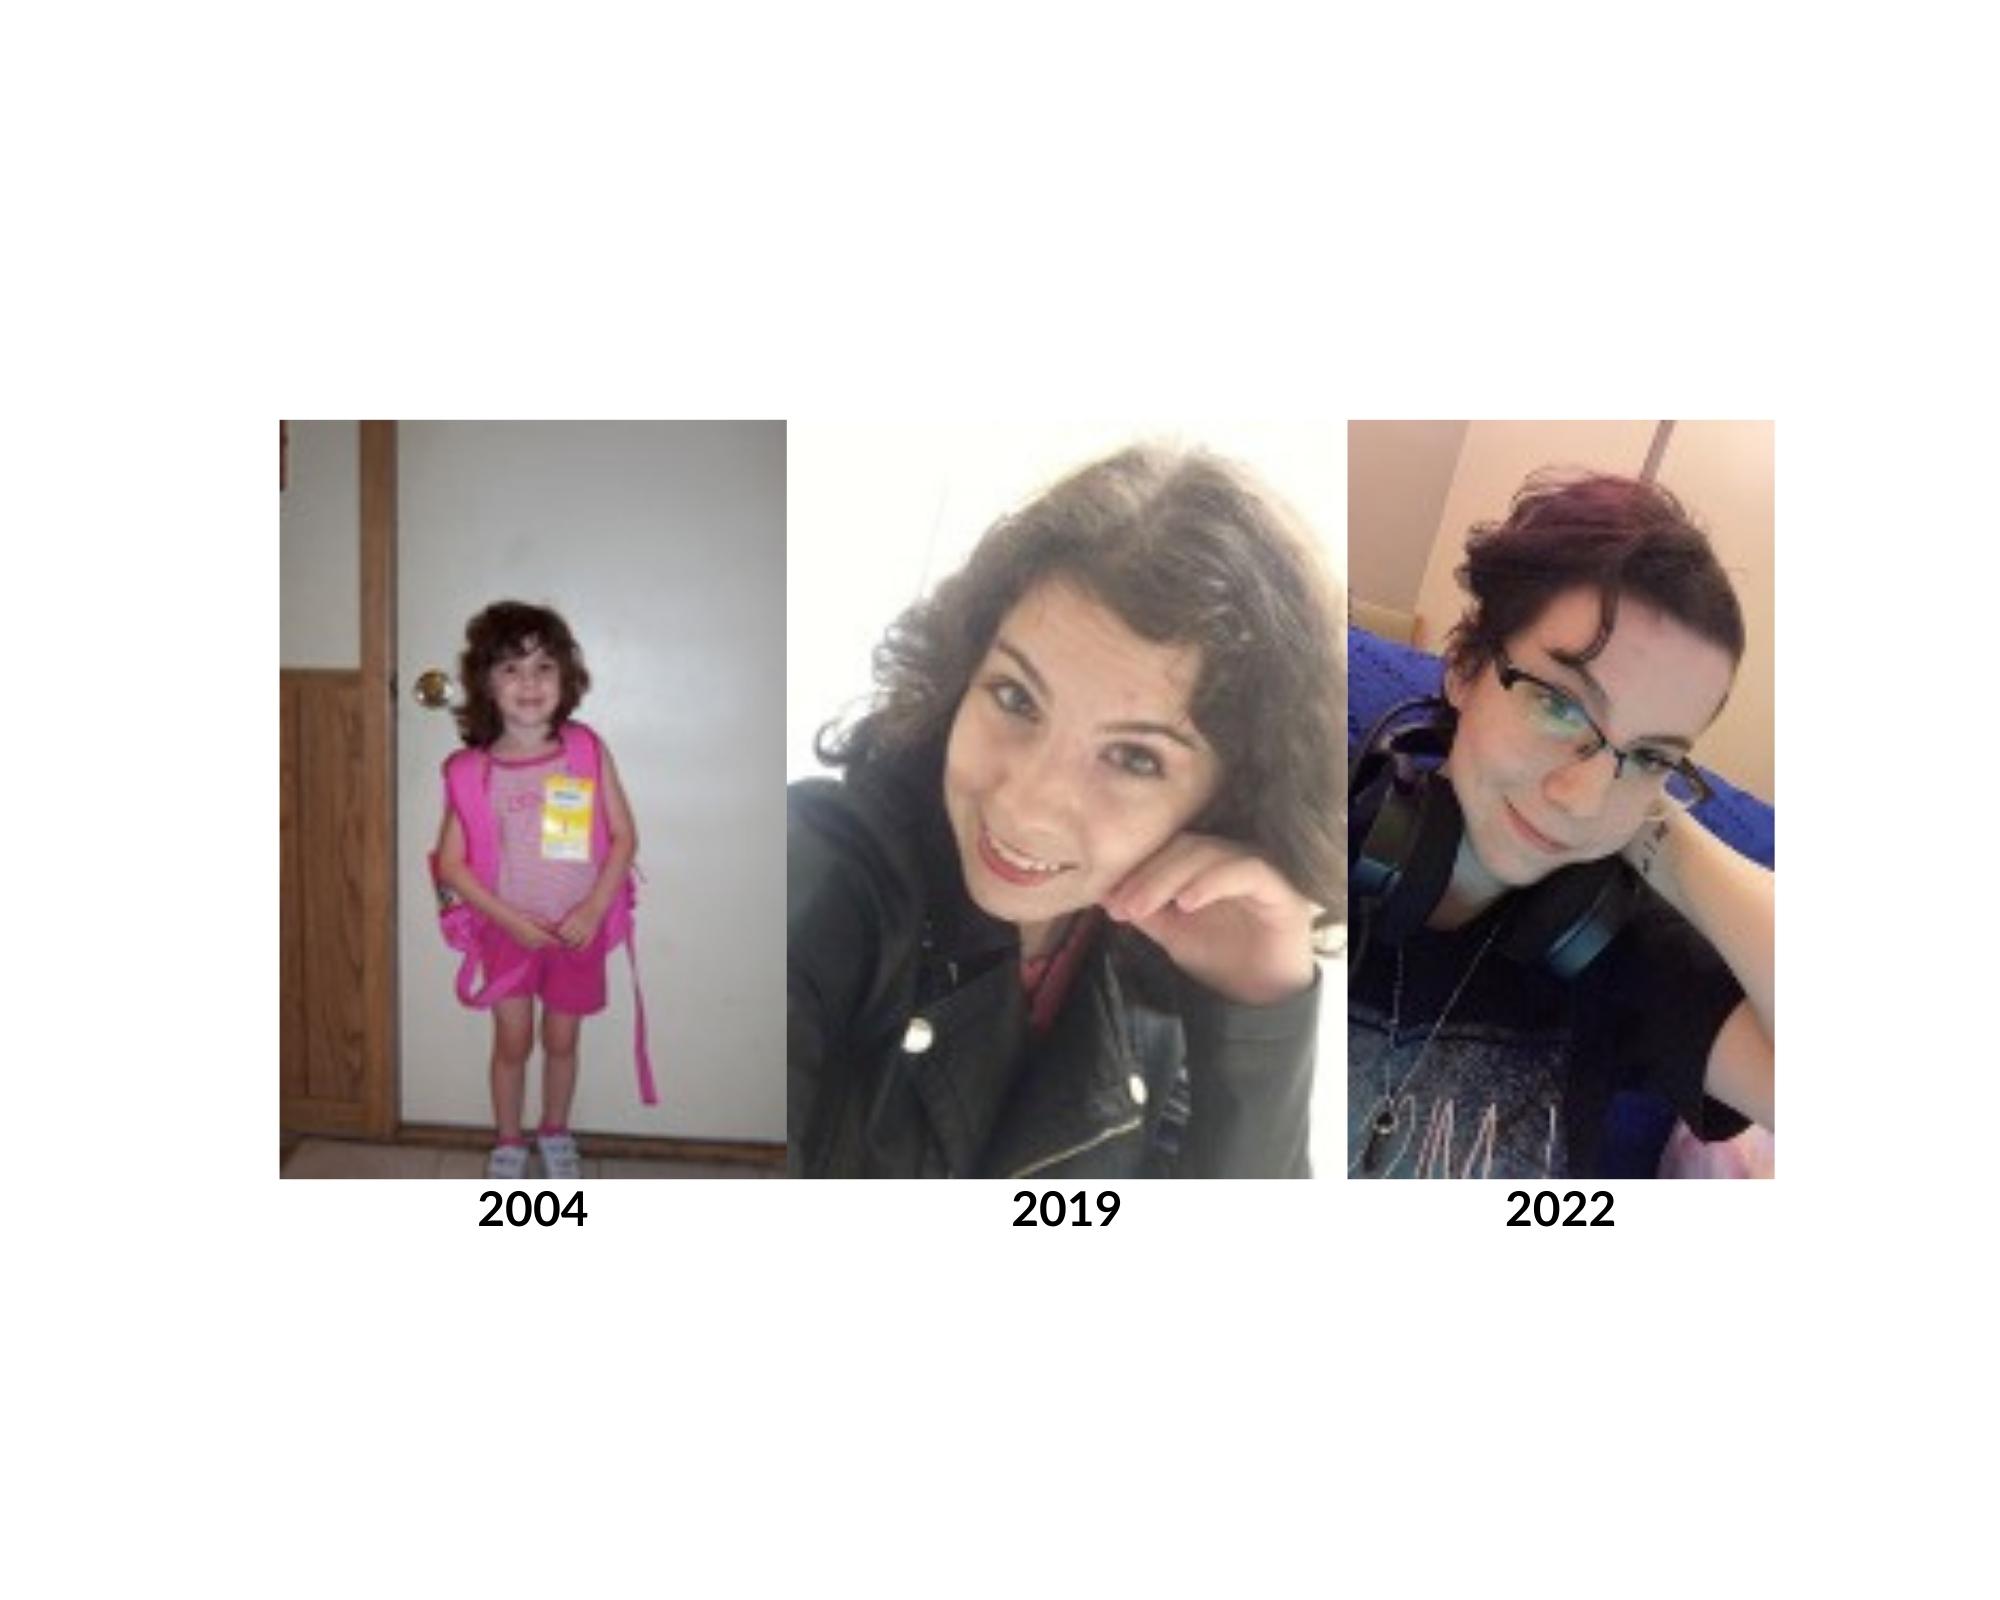 Chronological photos of blog author Em Dewolf in 2004, 2019 and 2022